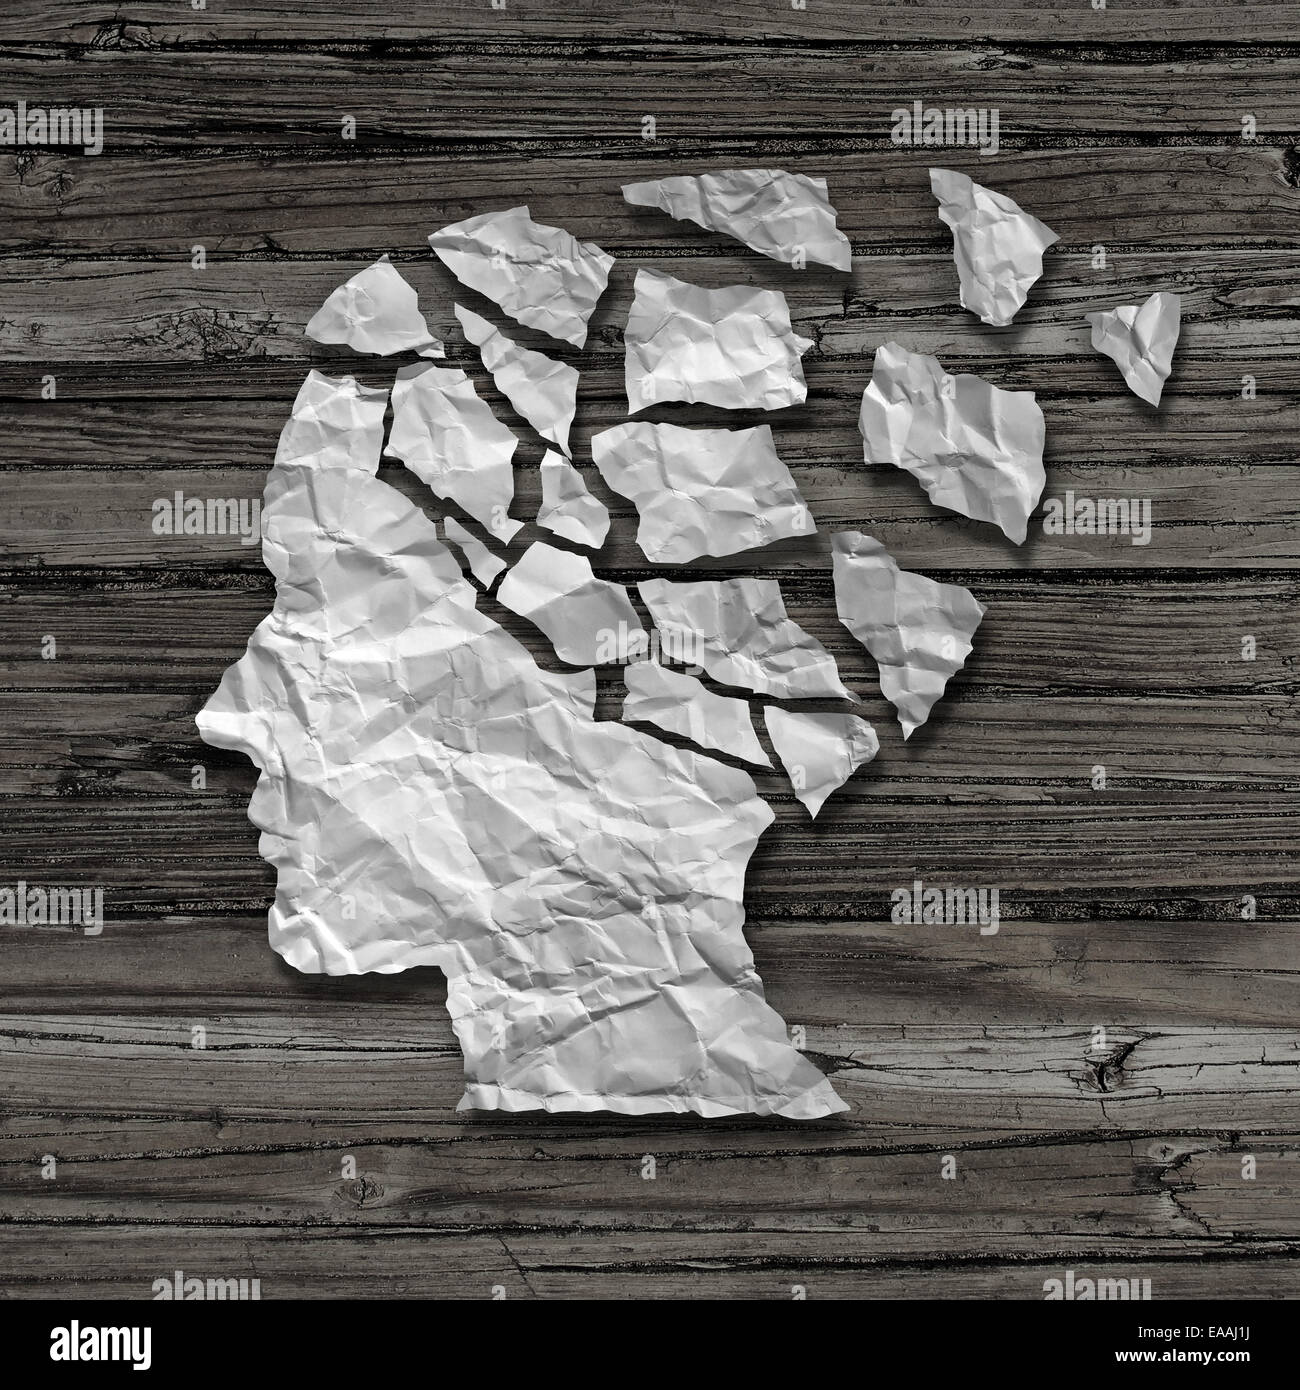 Alzheimer patient medical mental health care concept as a sheet of torn crumpled white paper shaped as a side profile of a human face on an old grungy wood background as a symbol for neurology and dementia issues or memory loss. Stock Photo